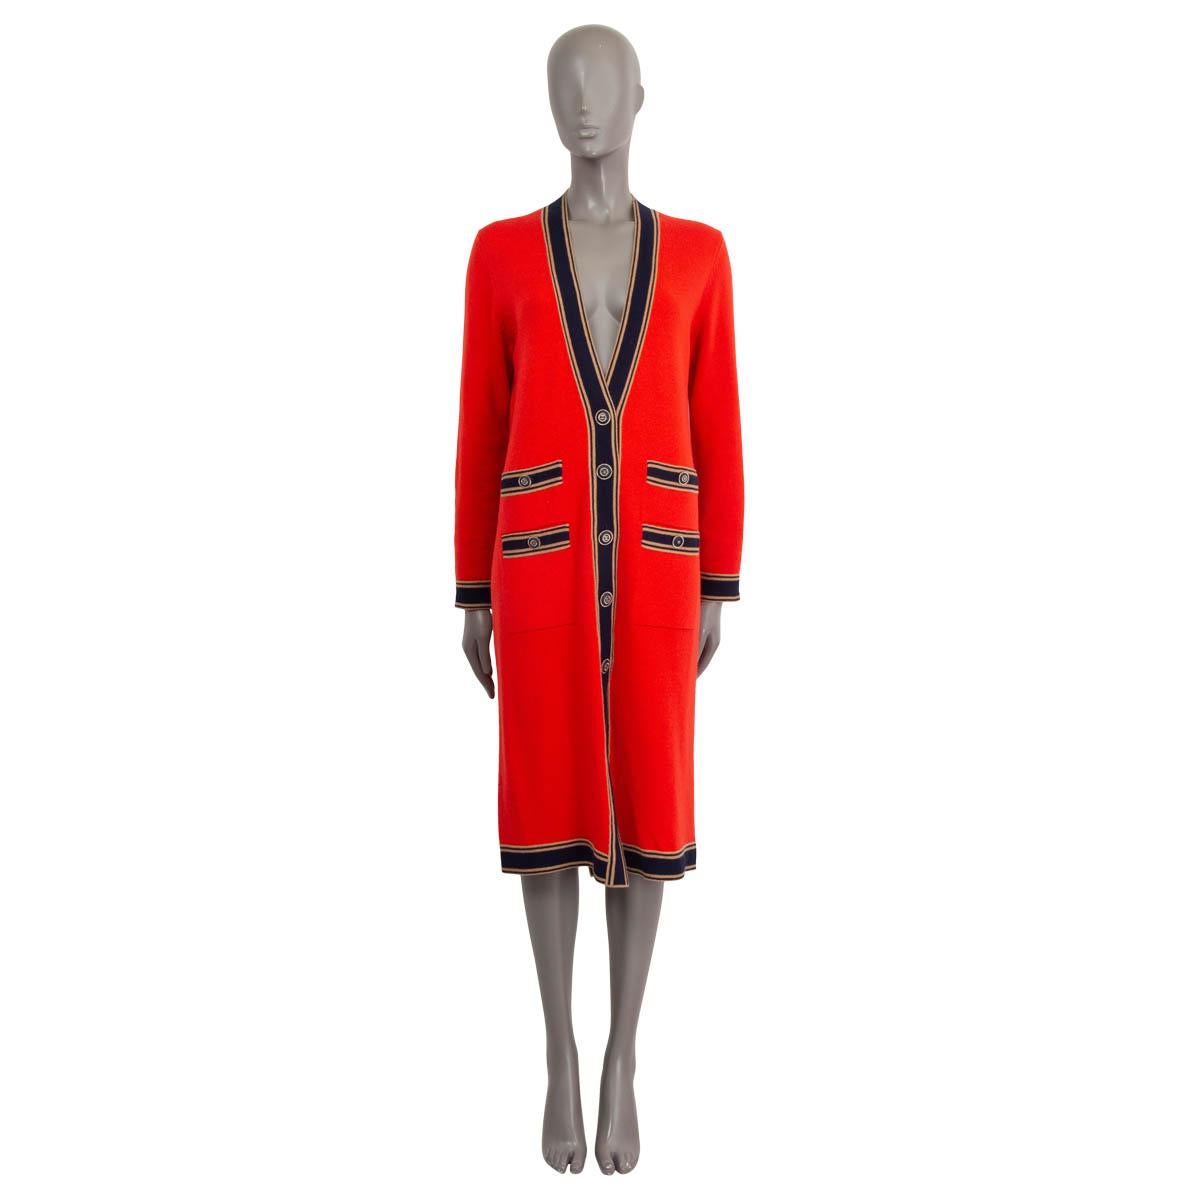 100% authentic Chanel Resort 2020 long cardigan in red, navy and camel cashmere (100%). Features a deep v-neck and four sewn shut buttoned patch pockets. Opens with 'CC' buttons on the front. Unlined. Has been worn once and is in virtually new